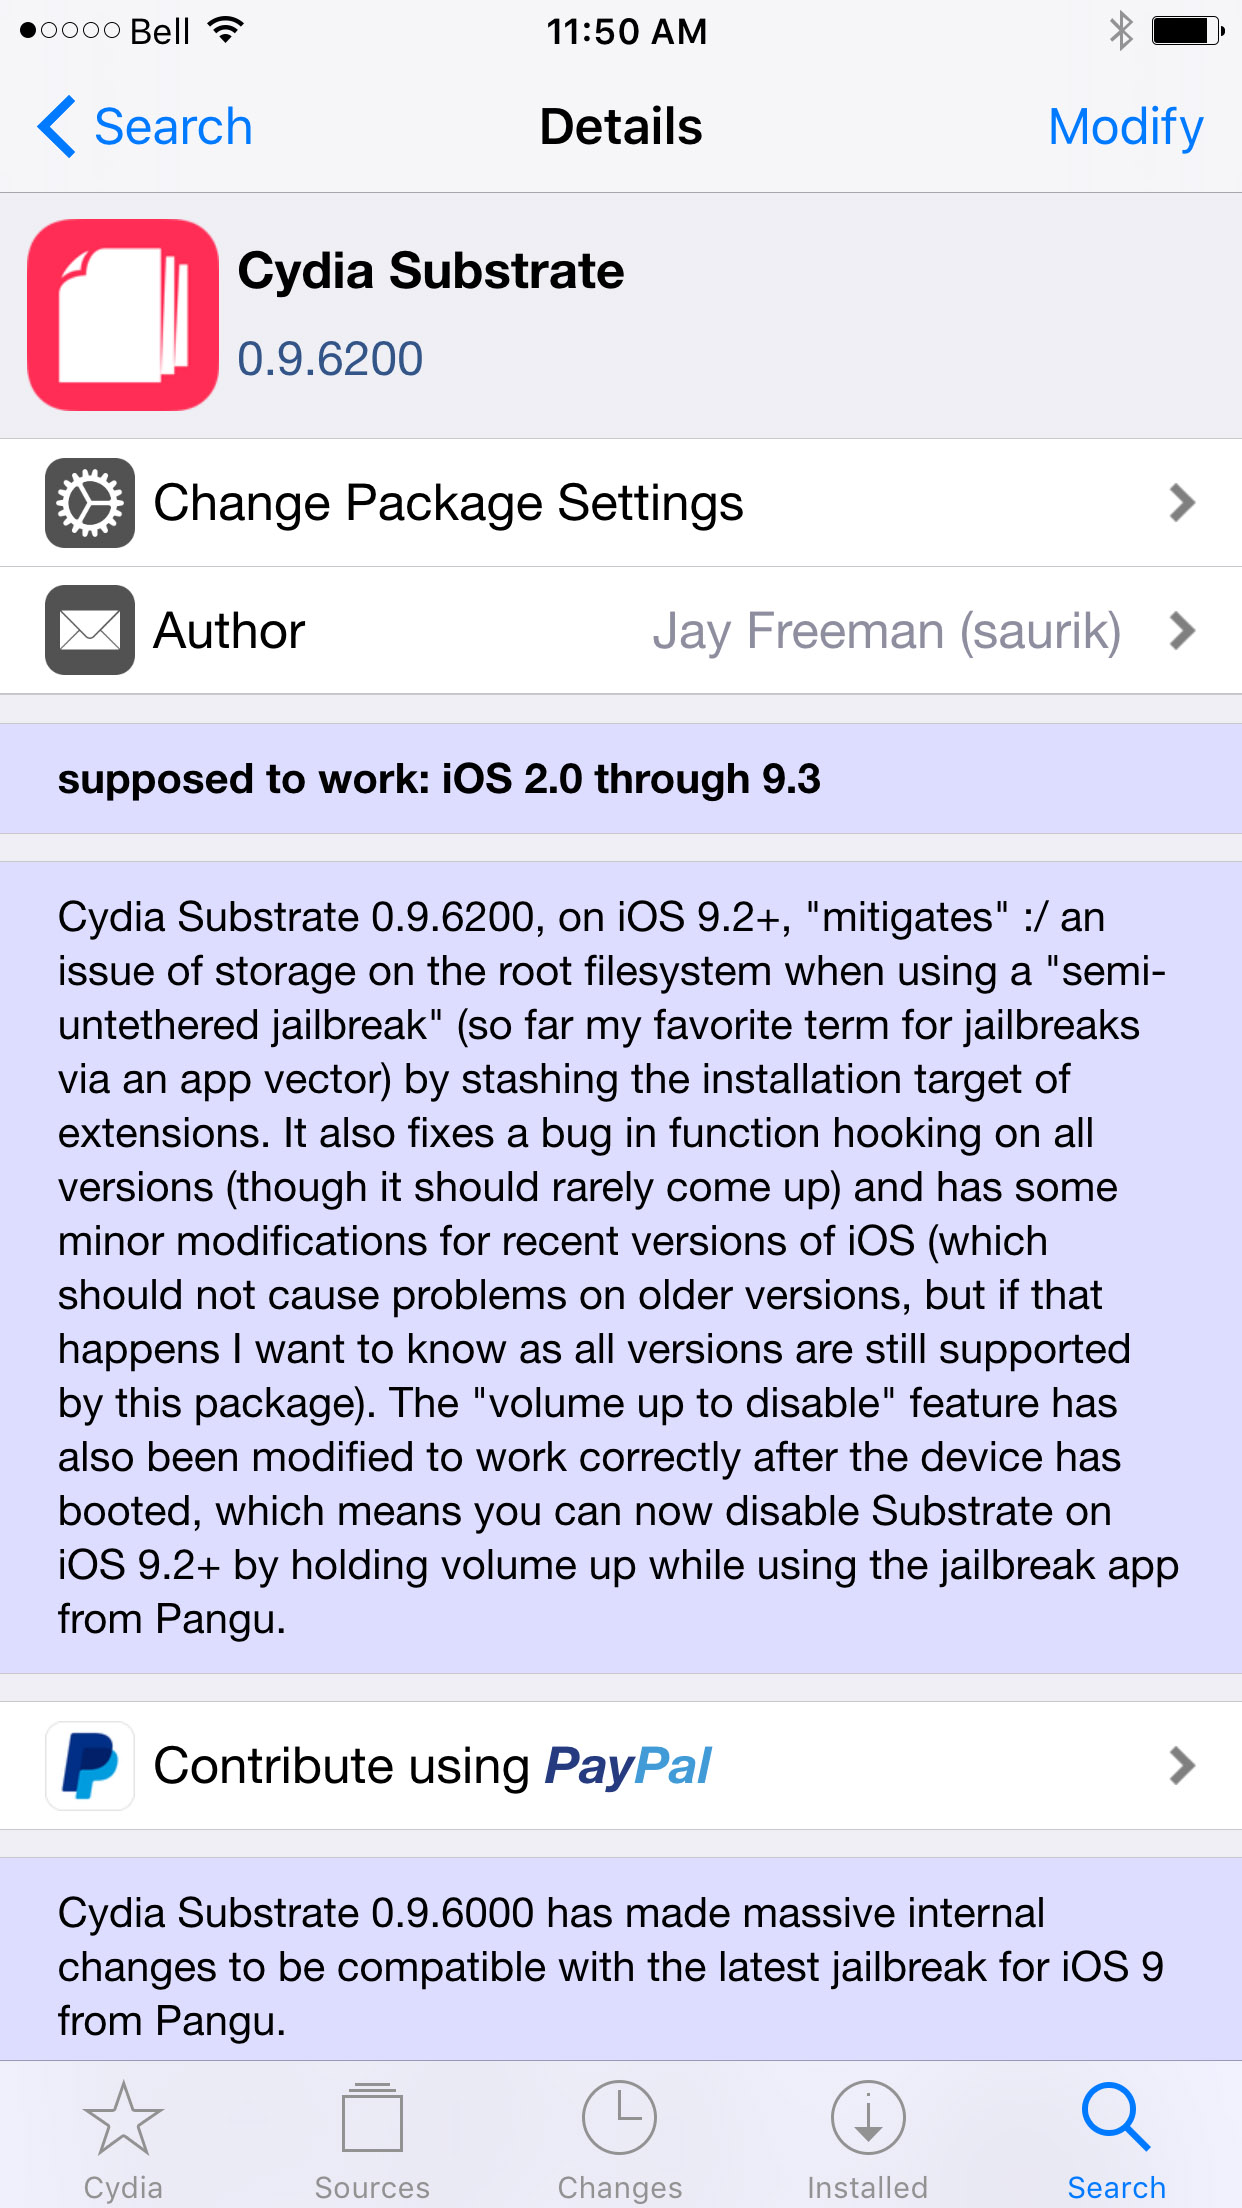 Cydia Substrate Updated With Improved Compatibility for Pangu Jailbreak of iOS 9.2 - 9.3.3